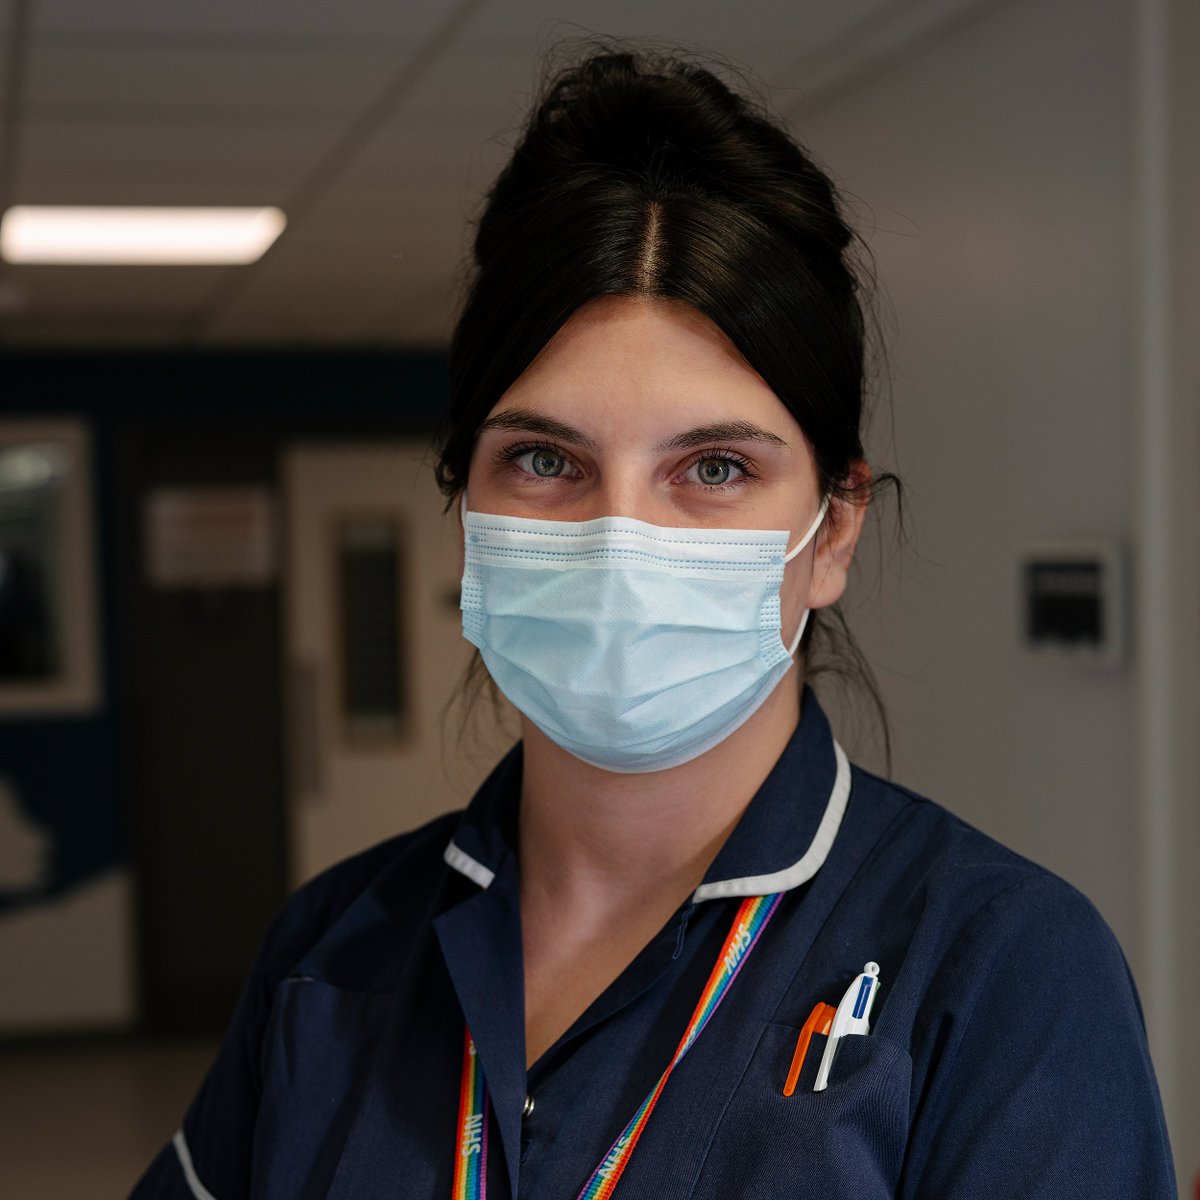 Jade Trewick, a sister on ward 49, has been named as 1 of the official starters of the #GreatNorthRun in recognition of the efforts of NHS staff during the pandemic. She'll be proudly representing everyone @NewcastleHosps who've worked so hard #ThankYouNHS bit.ly/3DAIs5K